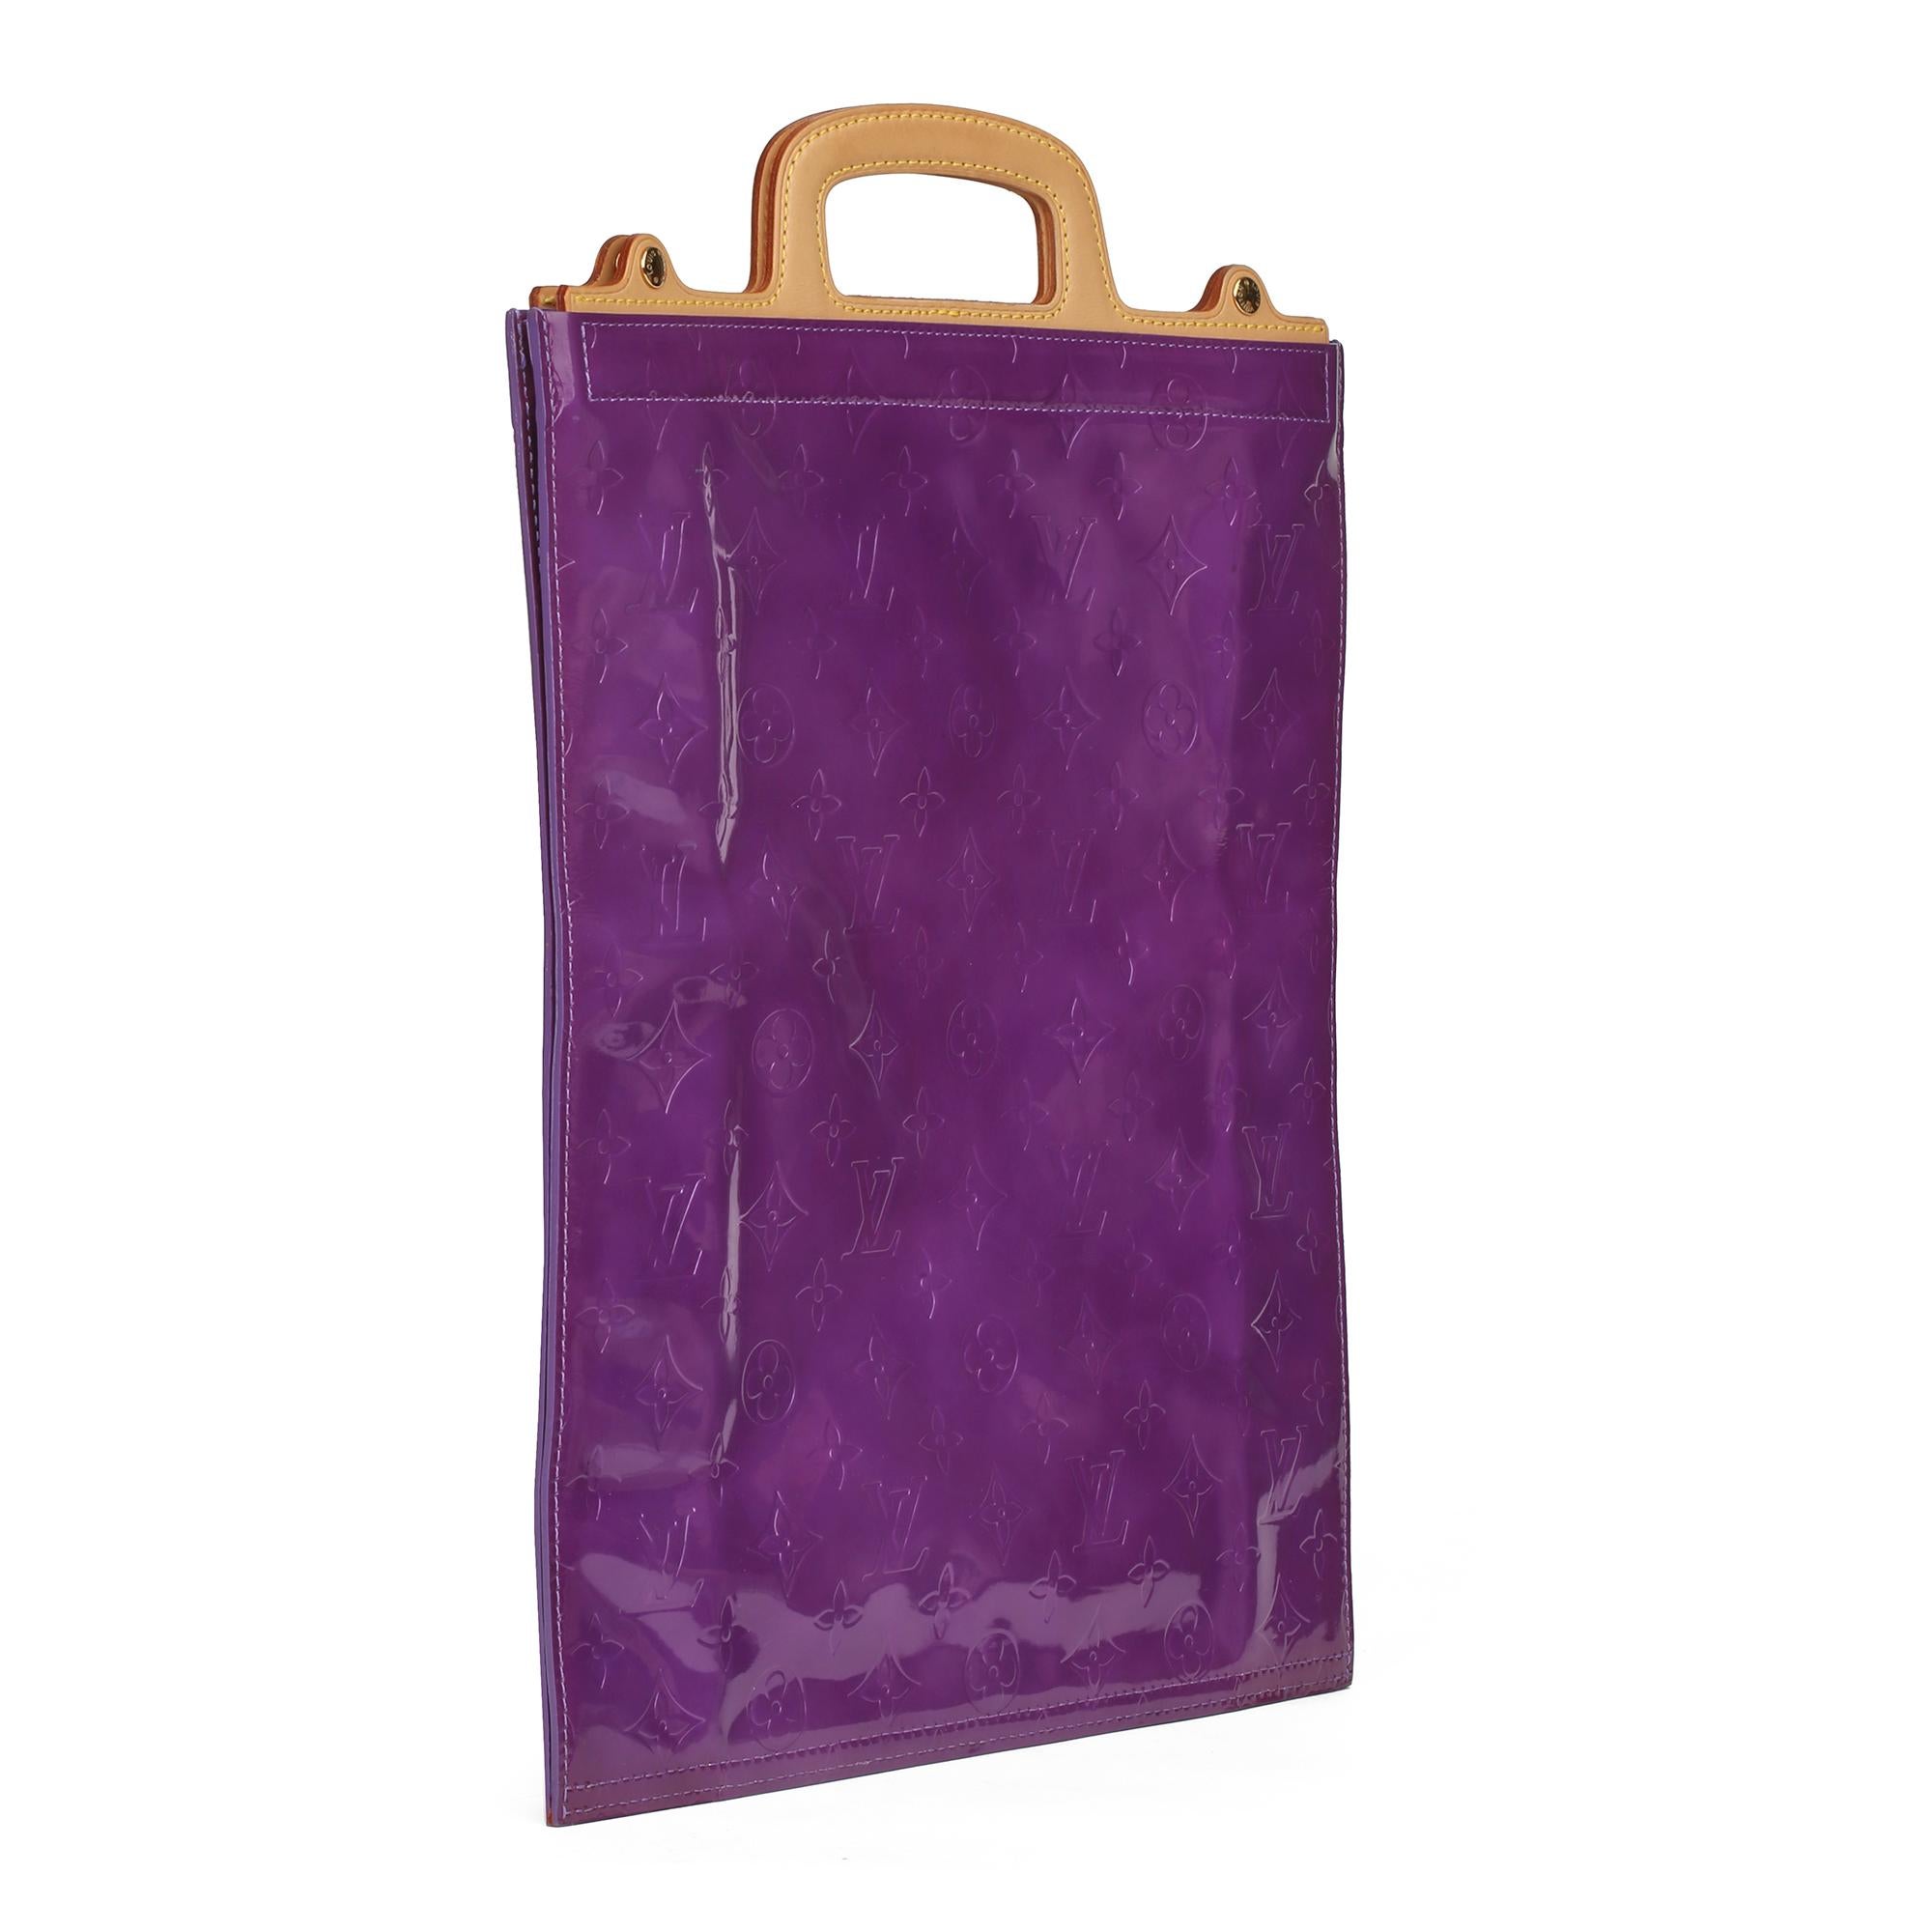 LOUIS VUITTON
Purple Monogram Vernis Leather & Vachetta Leather Vintage Stanton

Xupes Reference: CB299
Serial Number: TH1929
Age (Circa): 1999
Accompanied By: Louis Vuitton Dust Bag
Authenticity Details: Date Stamp (Made in France) 
Gender: